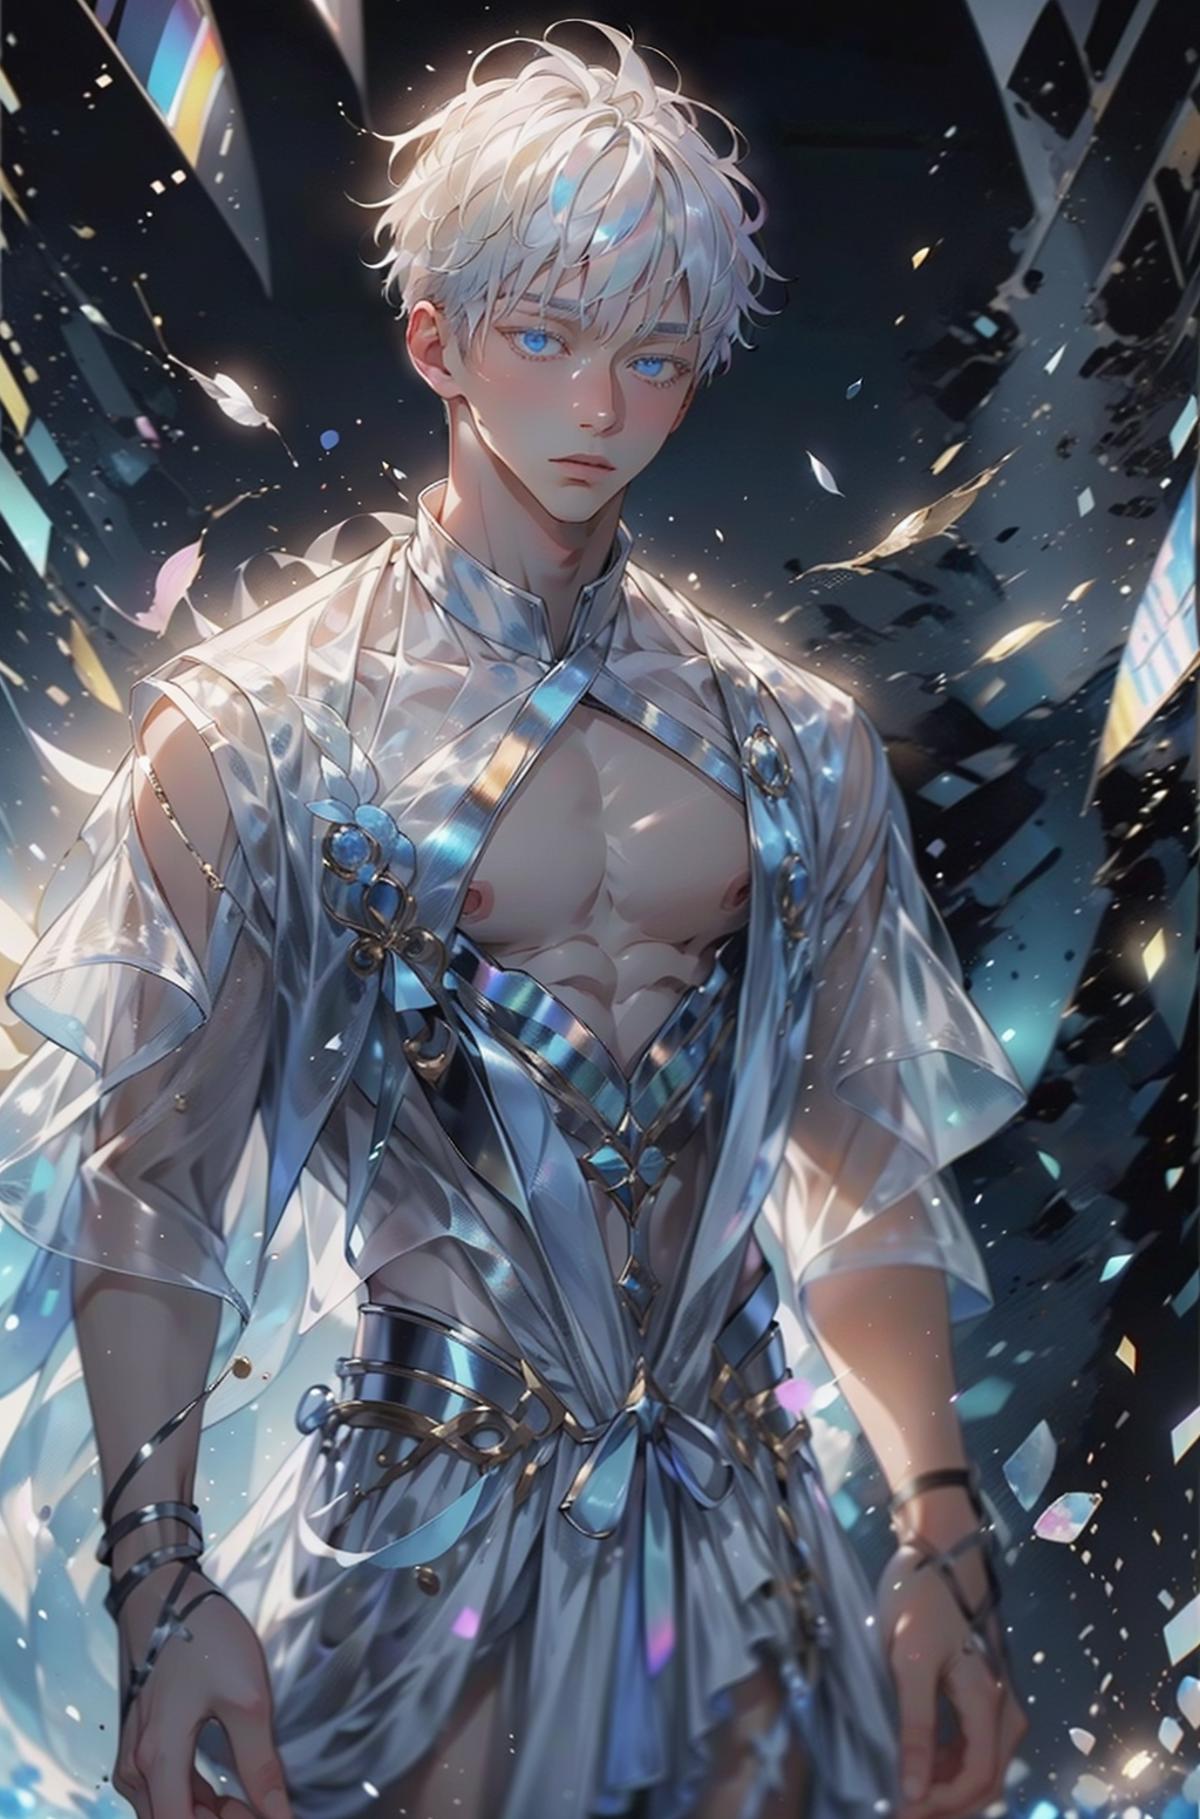 Shirtless Male Anime Character with Blue Eyes and Gold Chains.